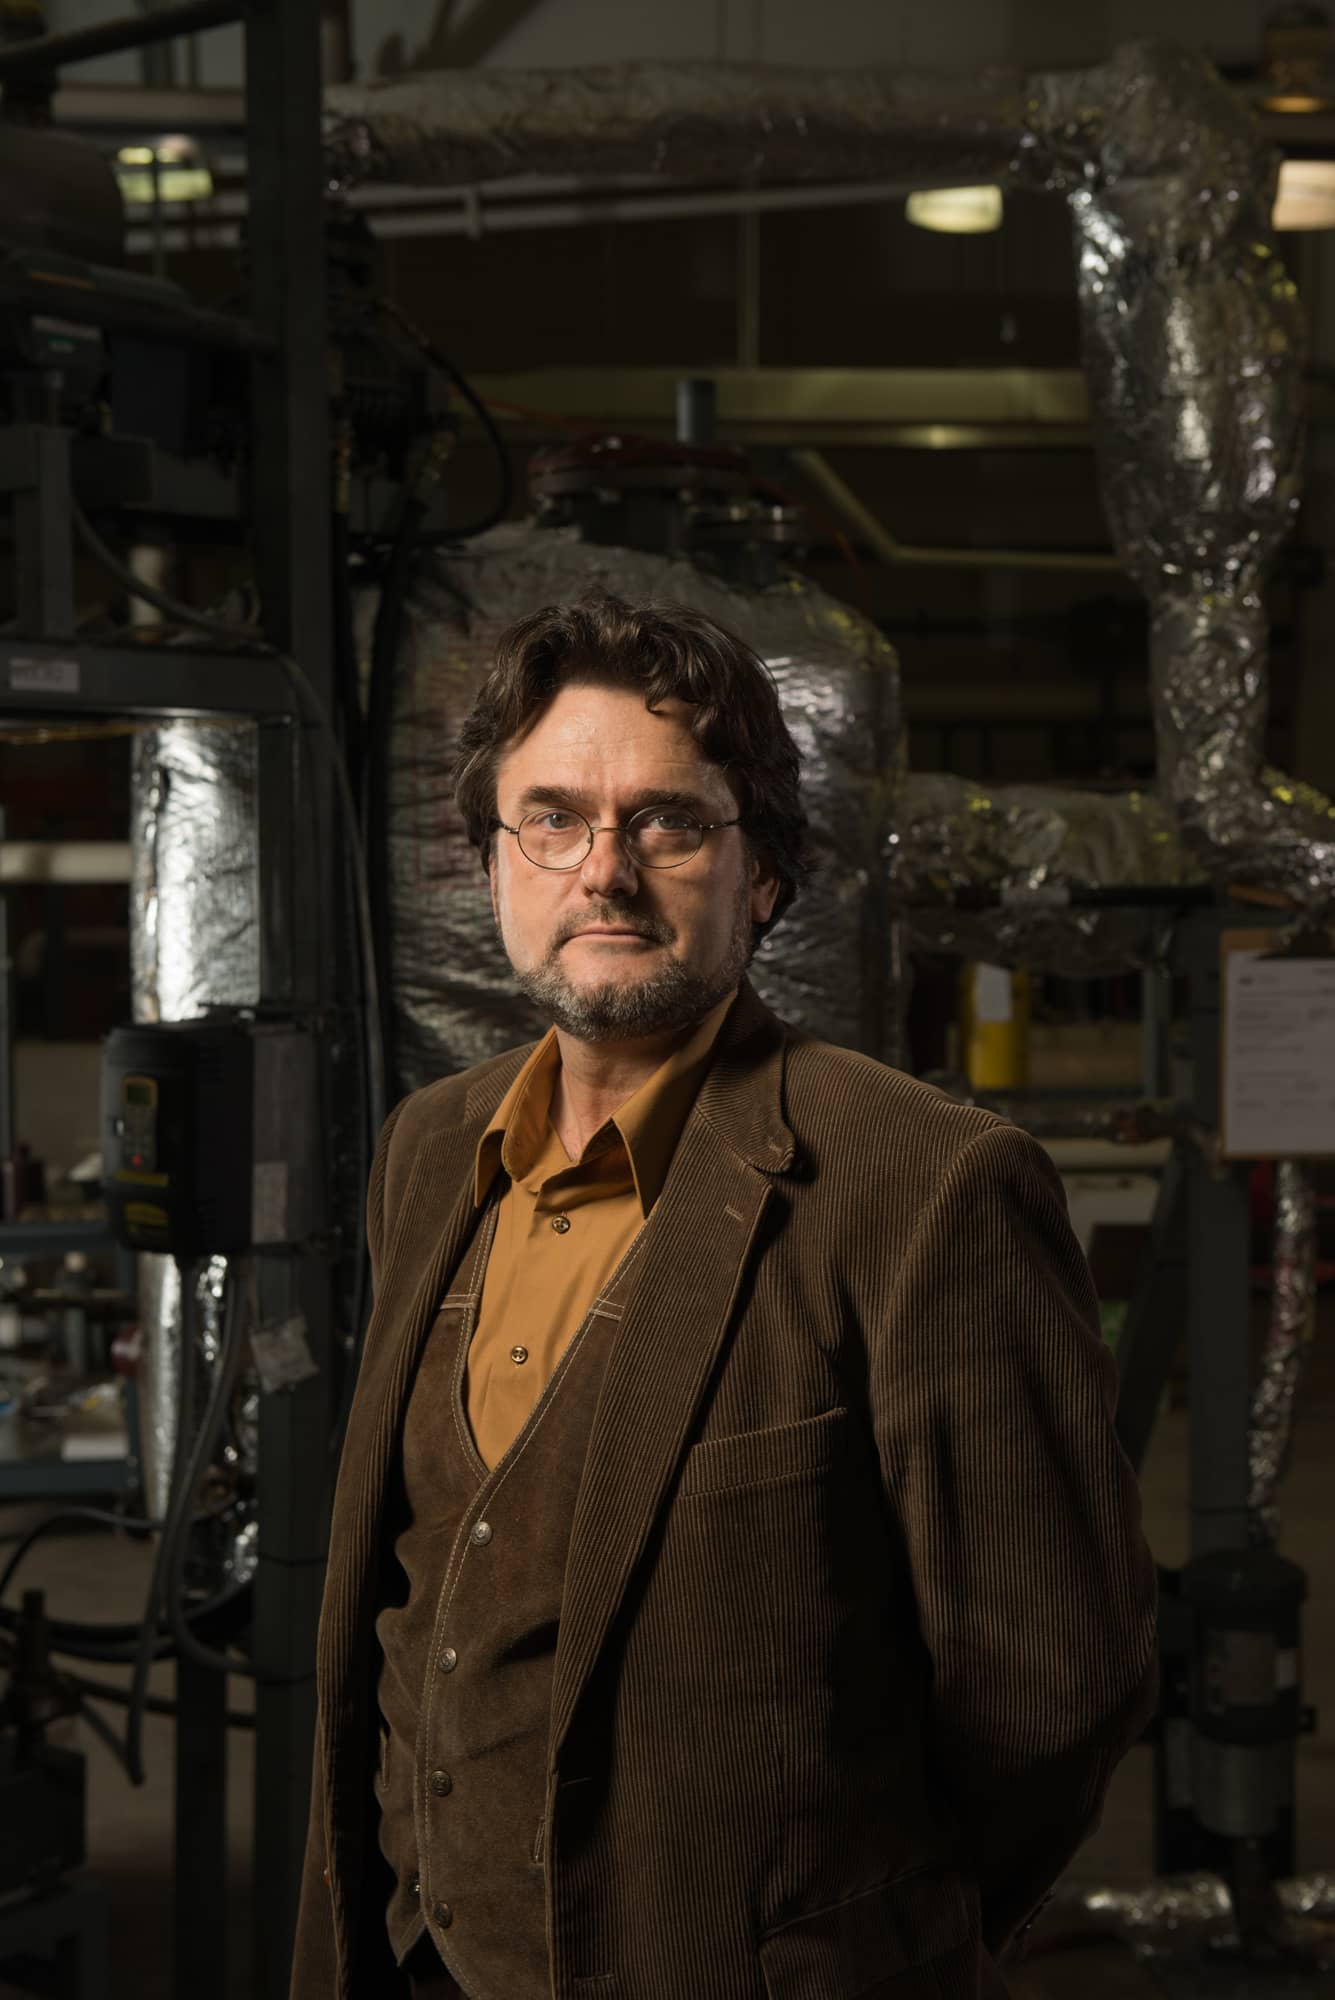 Srdjan Nesic, a Russ Professor, has also been director of the Institute for Corrosion and Multiphase Flow Technology since 2002 and is responsible for more than $30 million in external research funding, almost all from private industry.